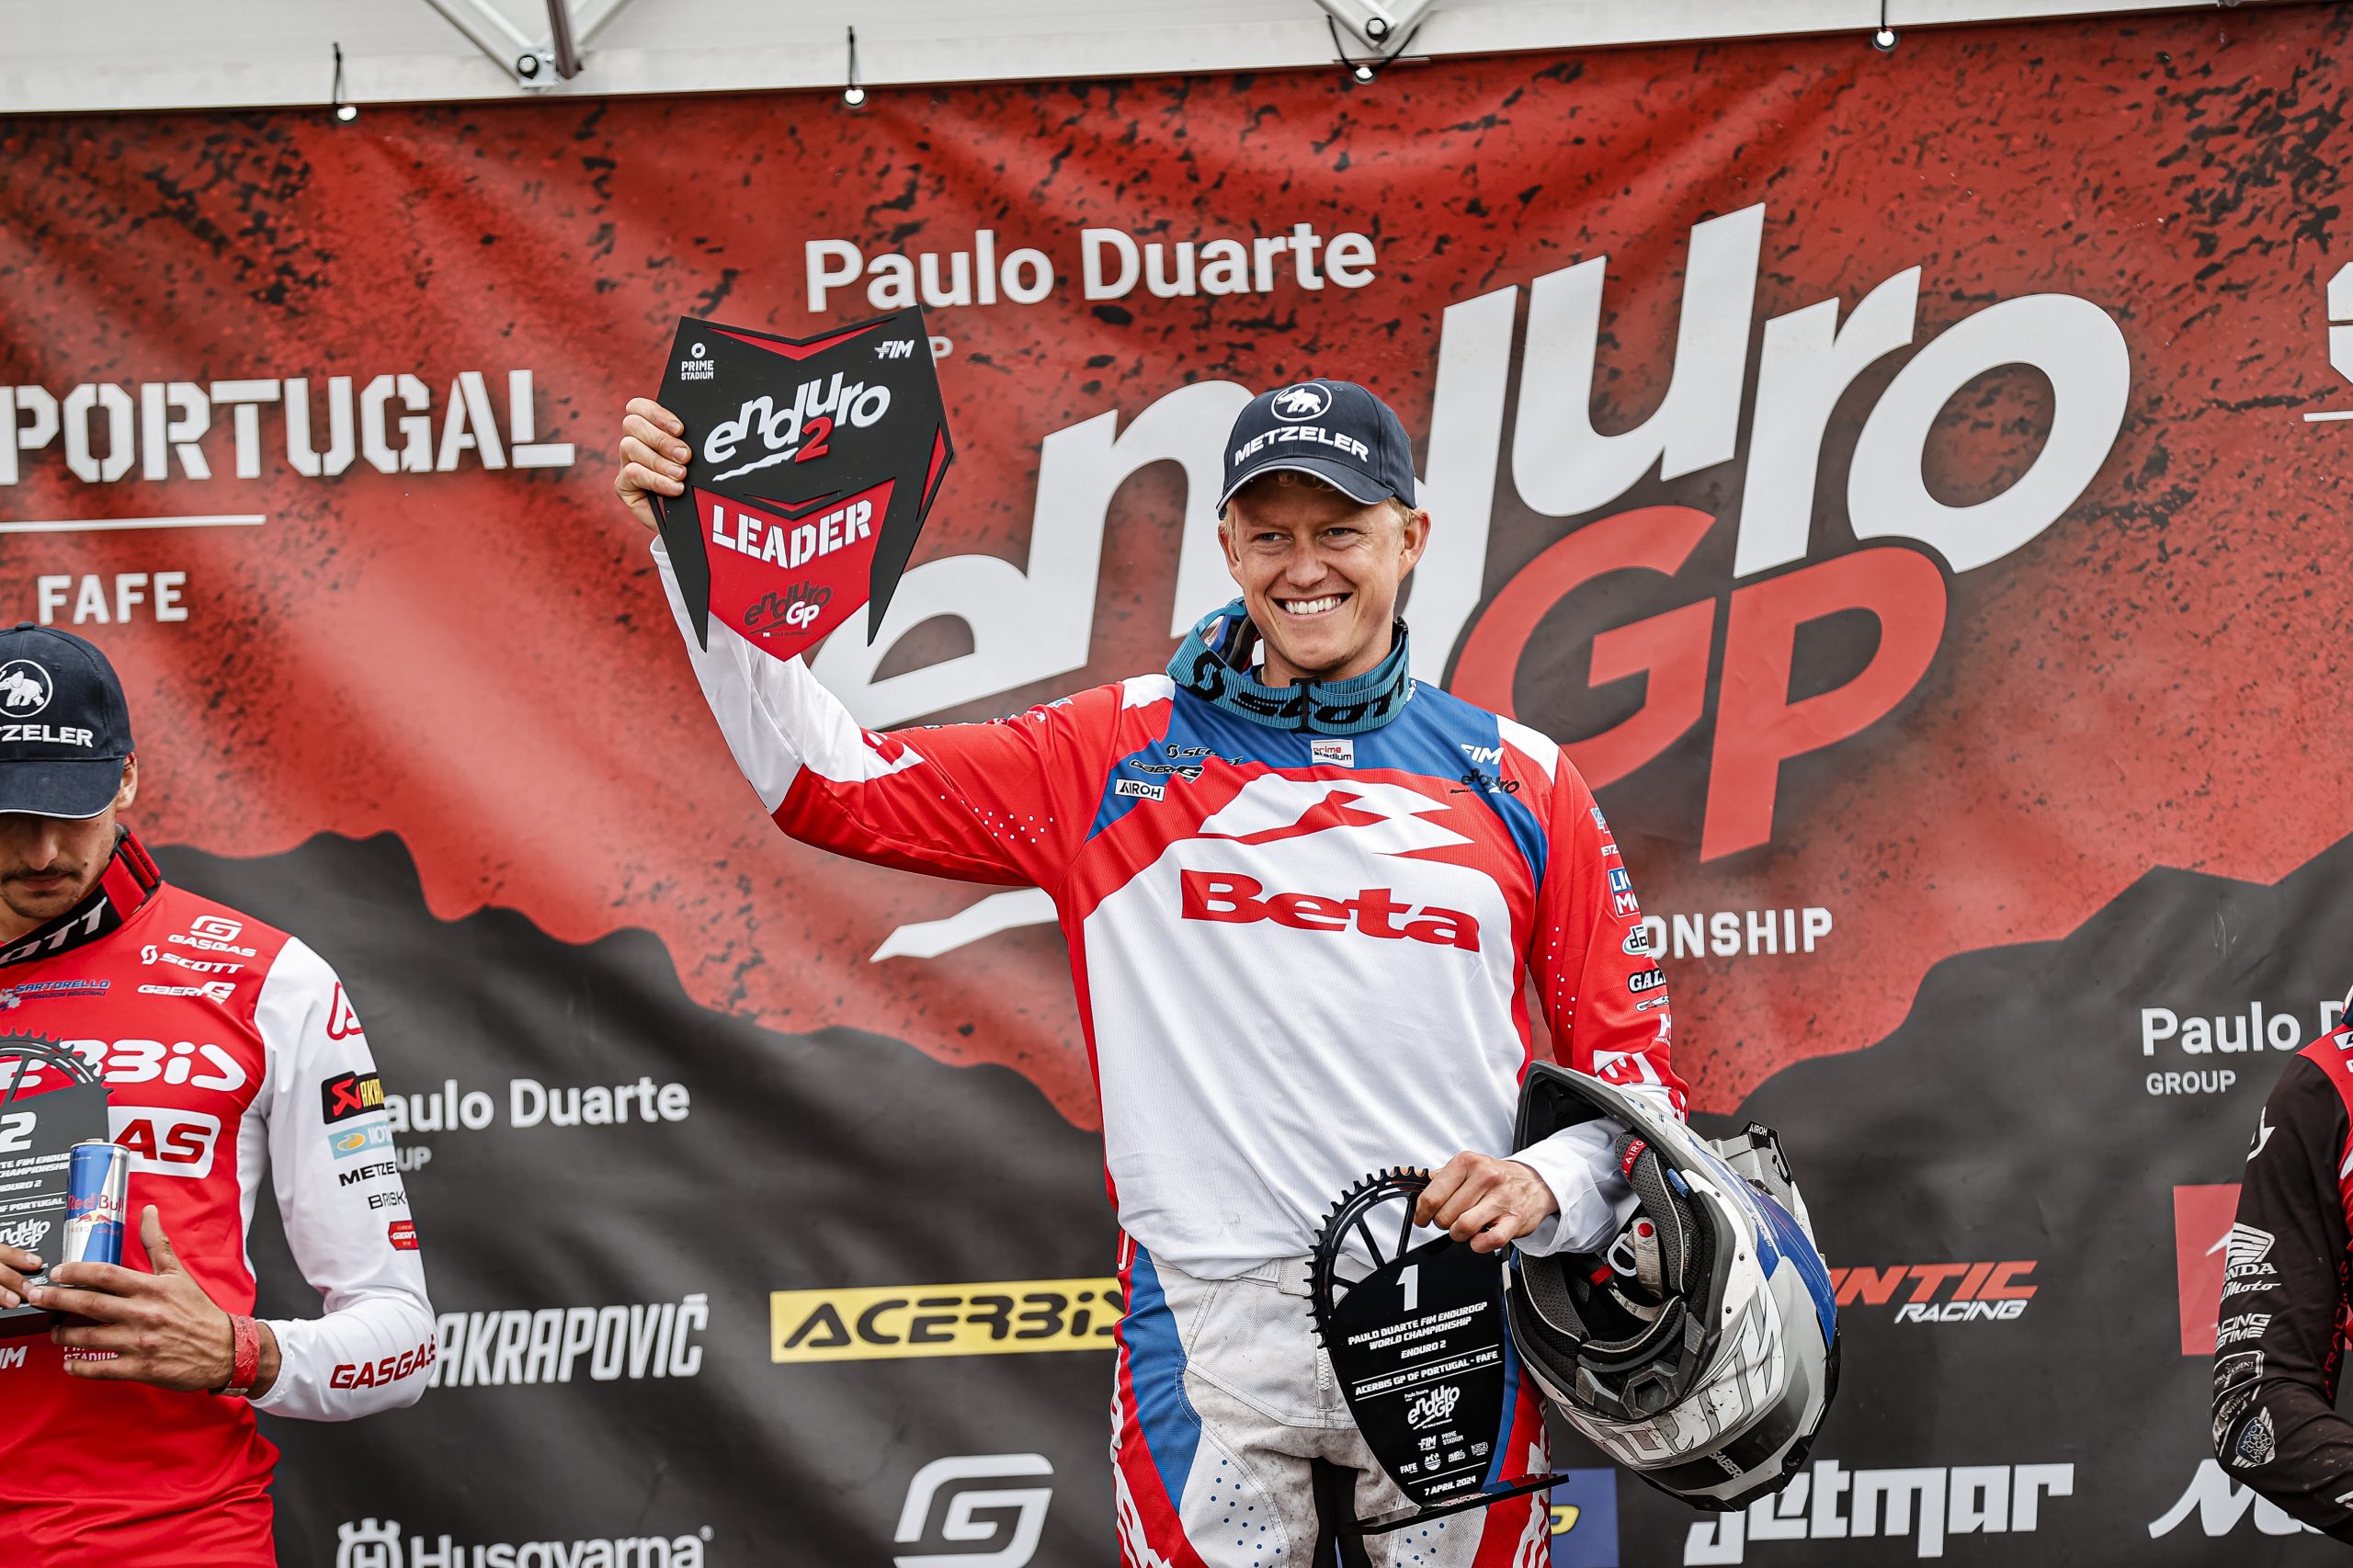 Nathan Watson: “To win an enduro world title is my ultimate goal”